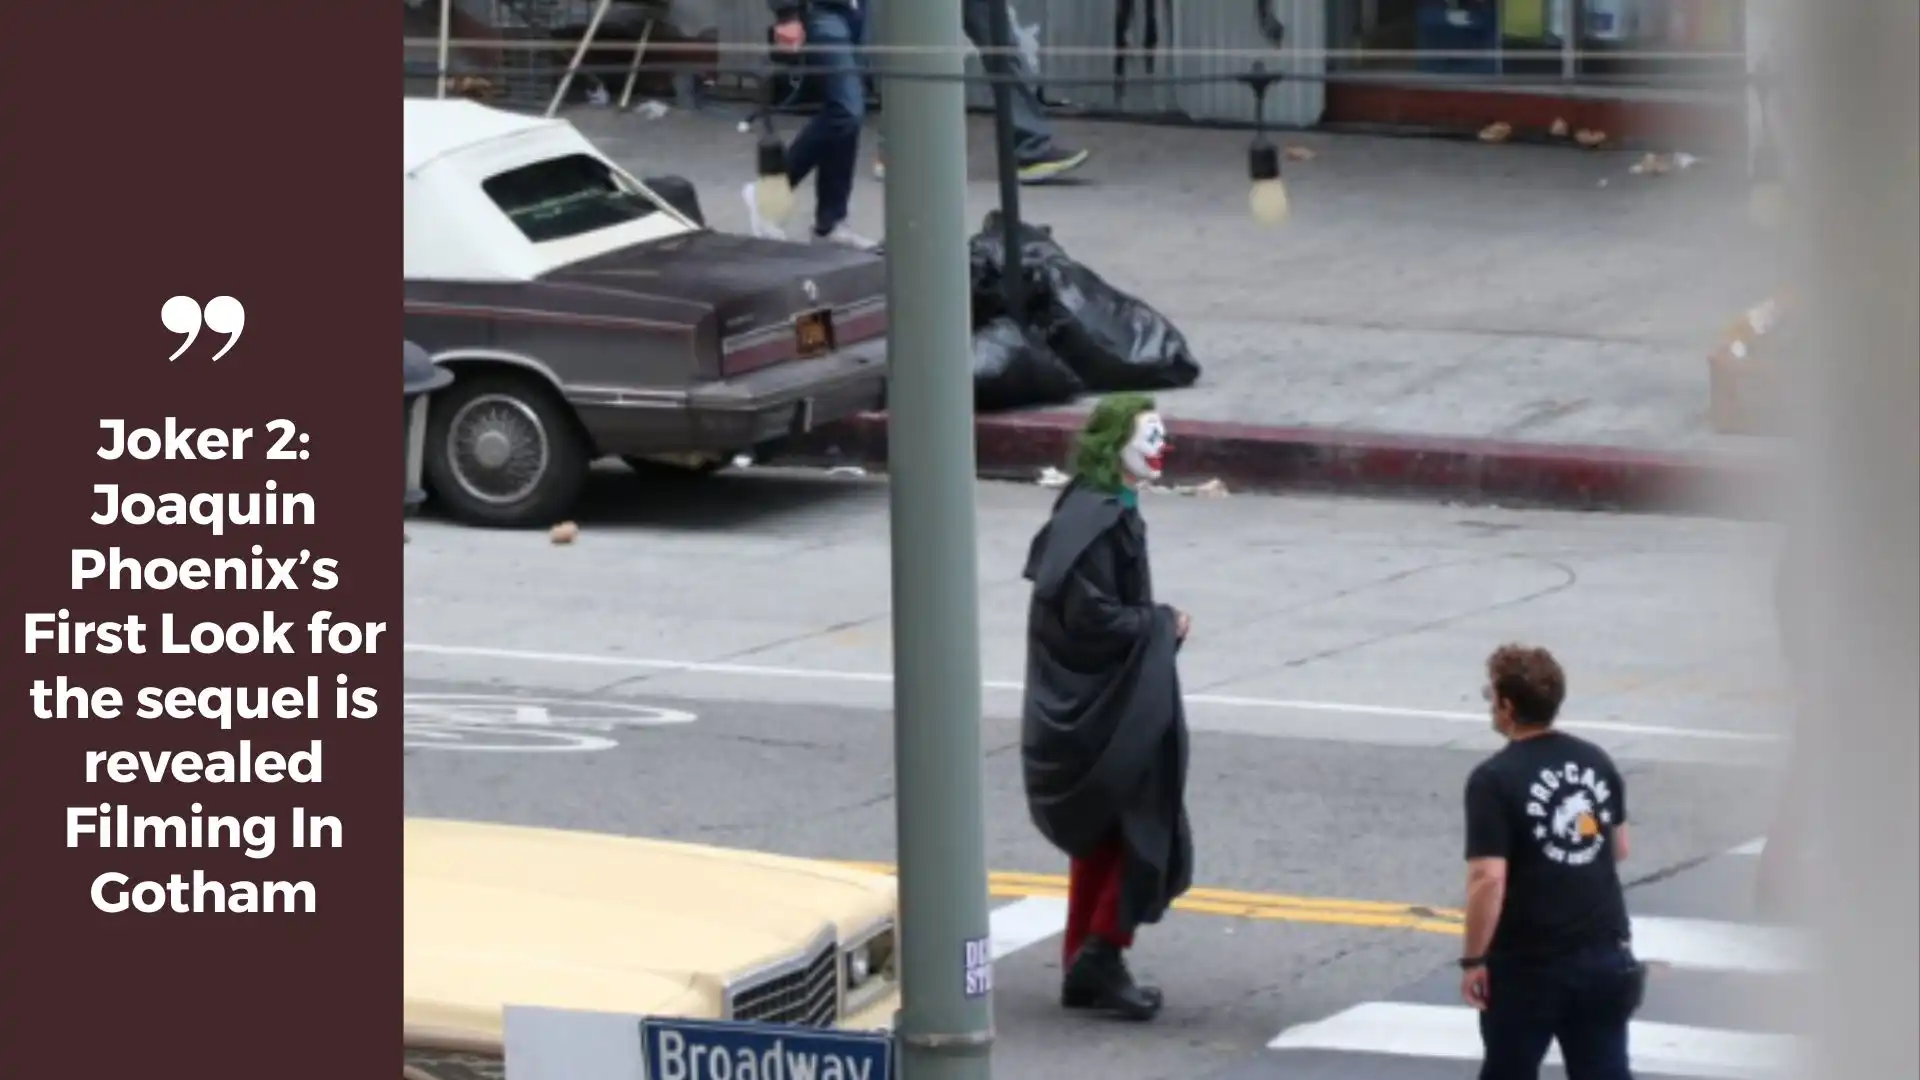 Joker 2: Joaquin Phoenix’s First Look for the sequel is revealed Filming In Gotham (Image credit: twitter)